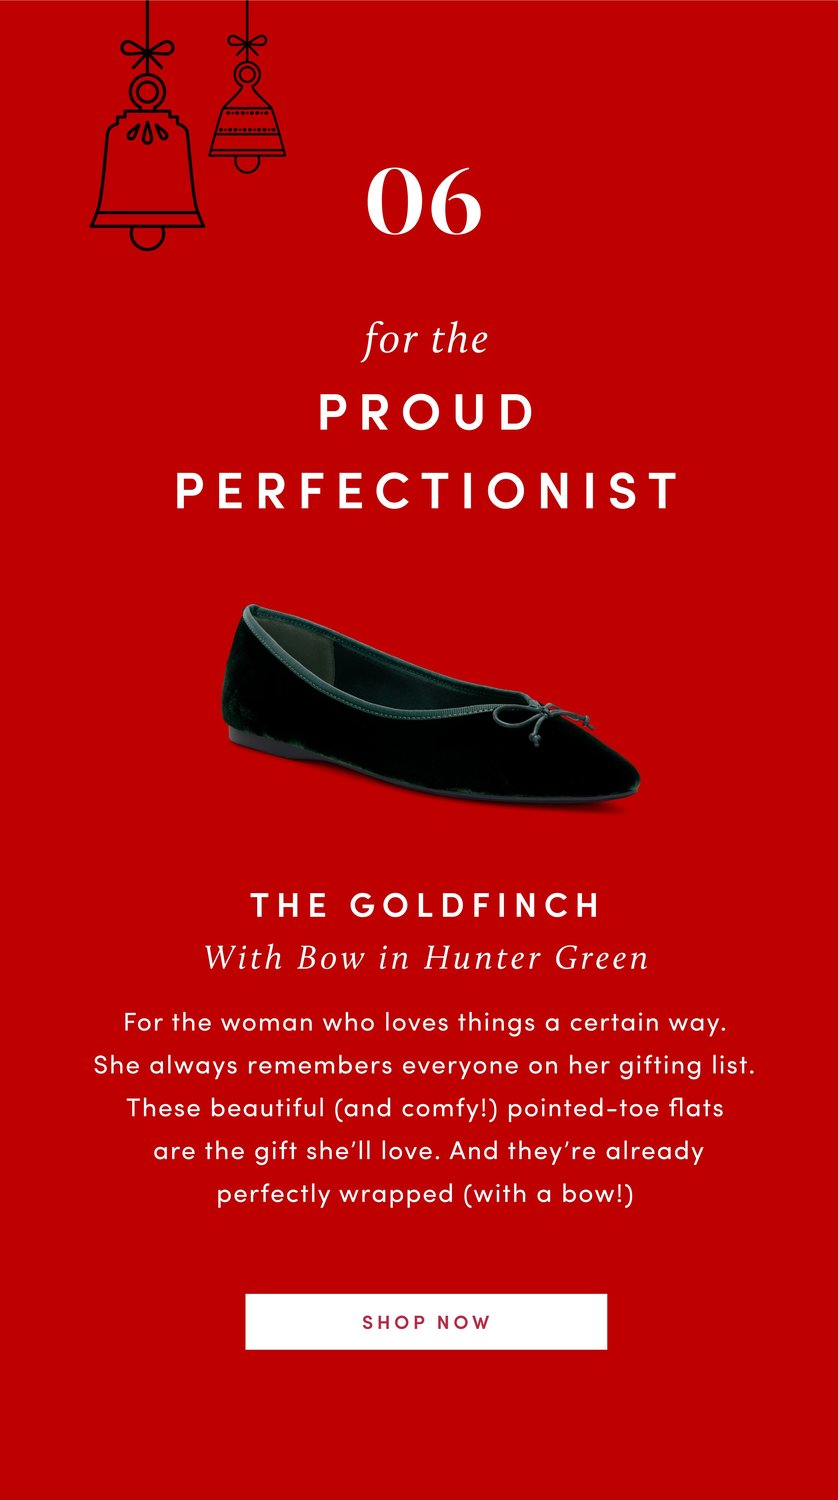 For the Perfectionist - The Goldfinch >